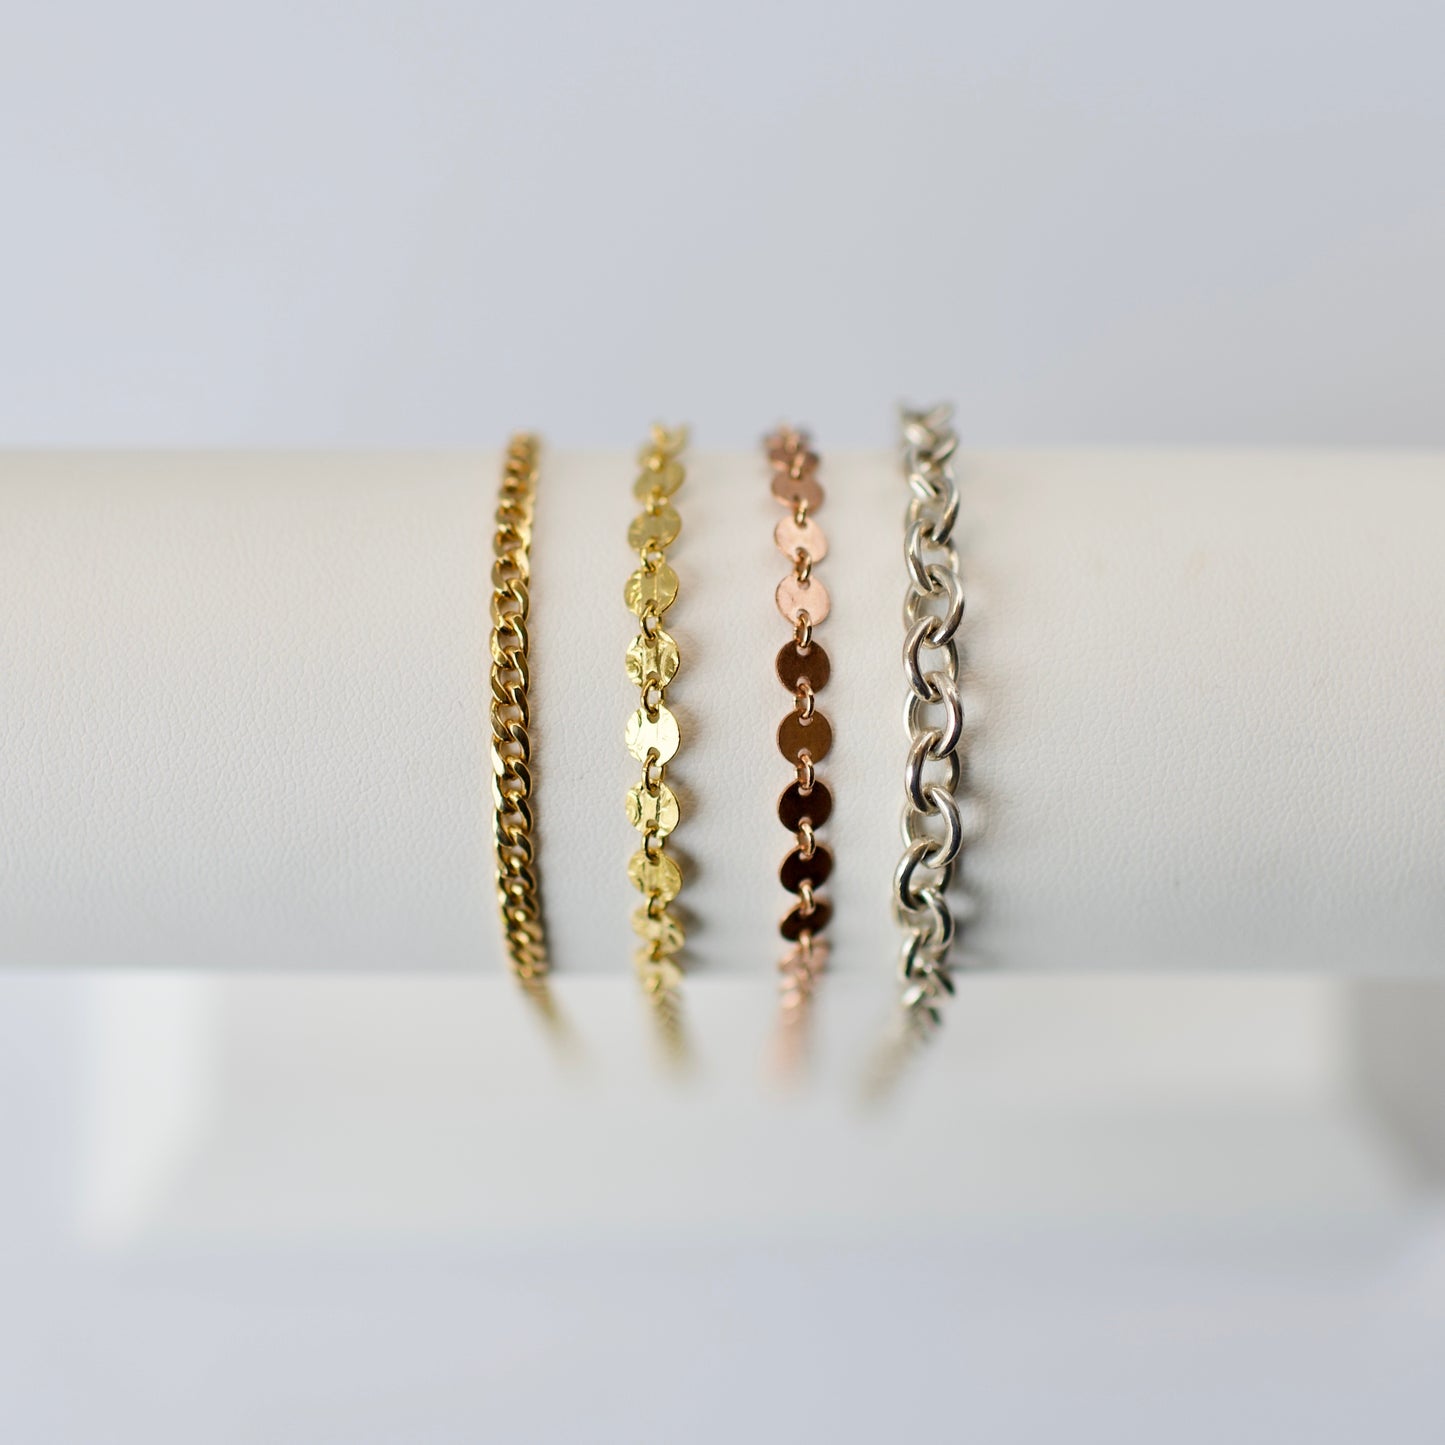 Bracelet- Permanent Jewelry Chain 14k Yellow + Rose Gold Fill, and Sterling Silver